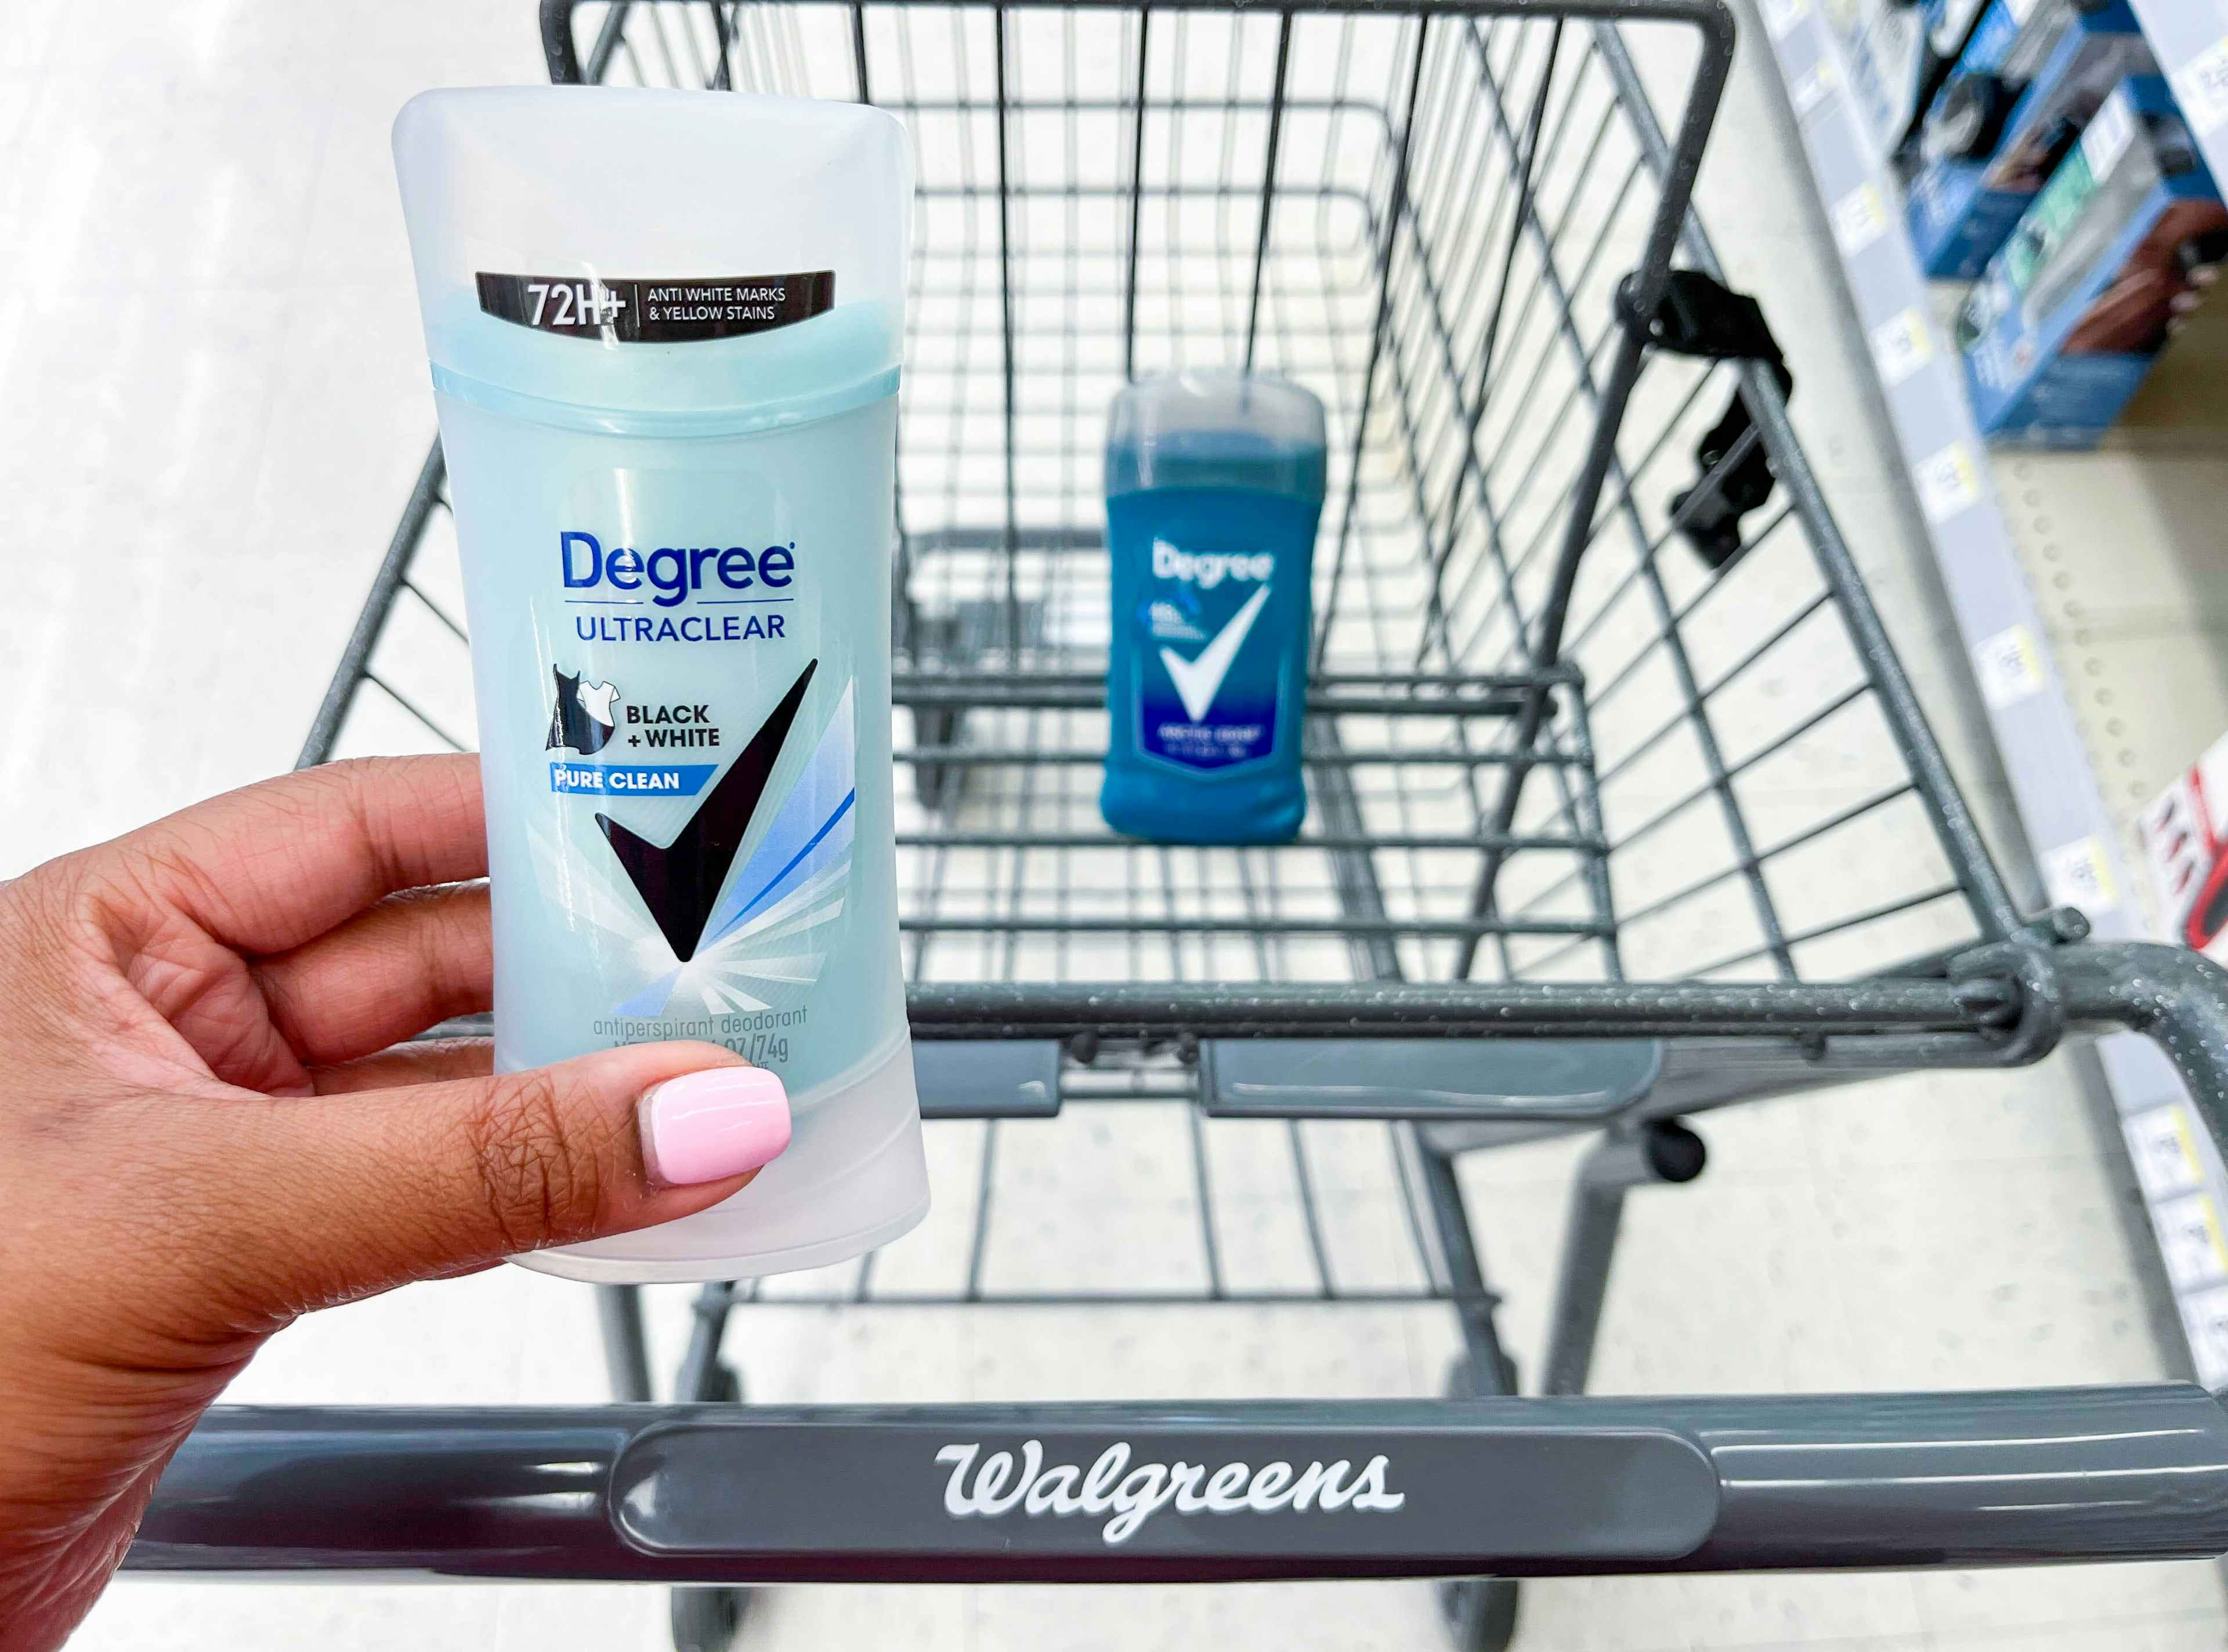 hand holding one Degree deodorant in front of shopping cart with another Degree deodorant inside cart